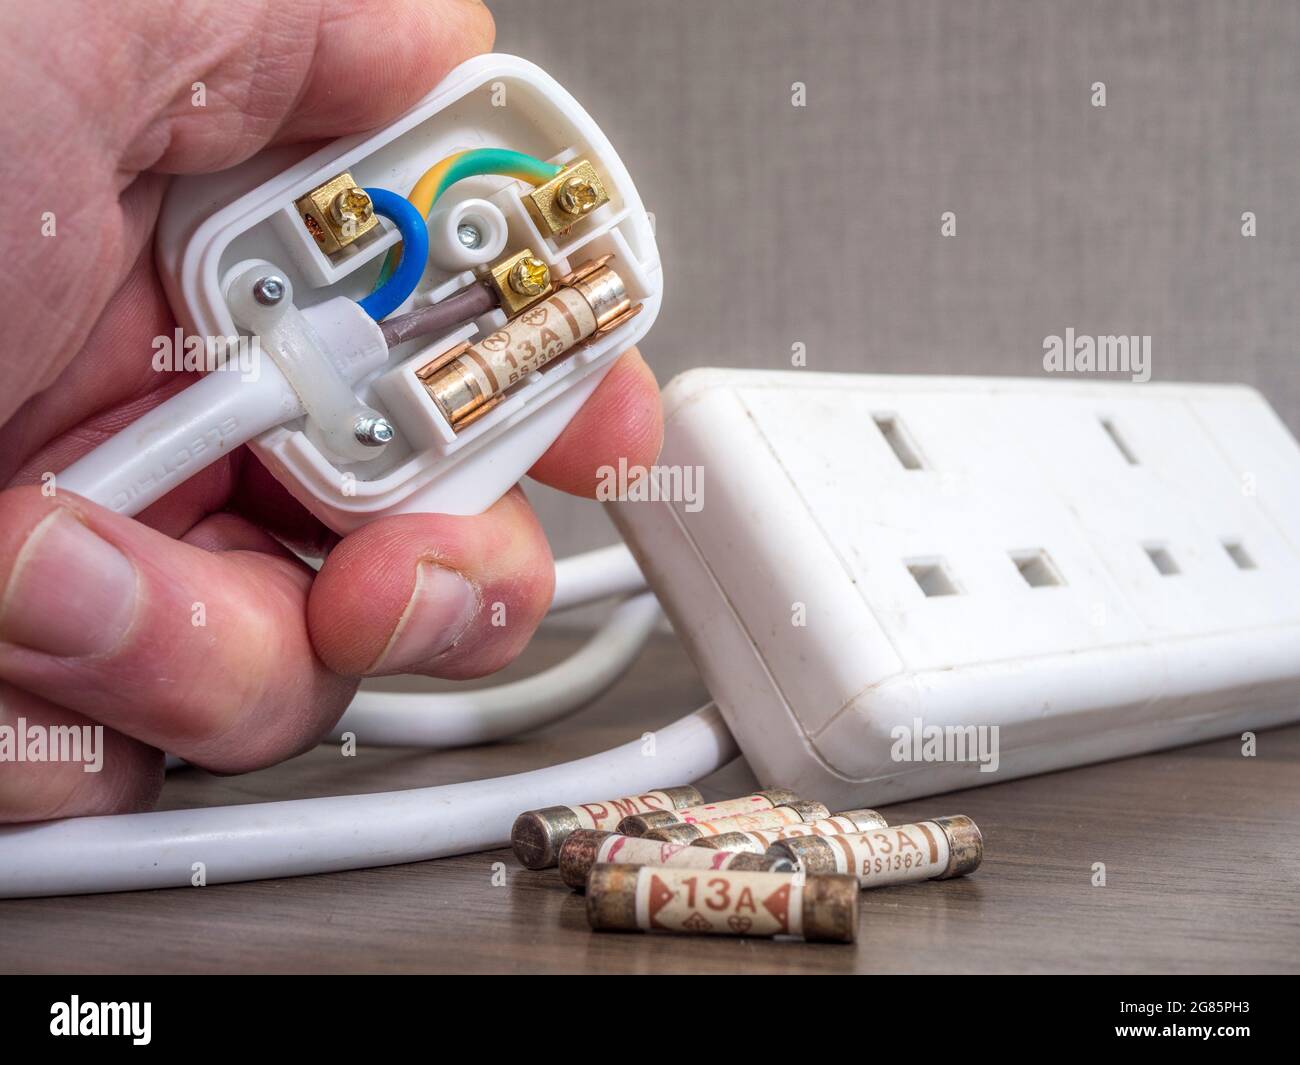 Closeup of a man’s hand holding an open three pin British electrical plug on the end of an extension lead, with new 13 amp fuses nearby. Stock Photo